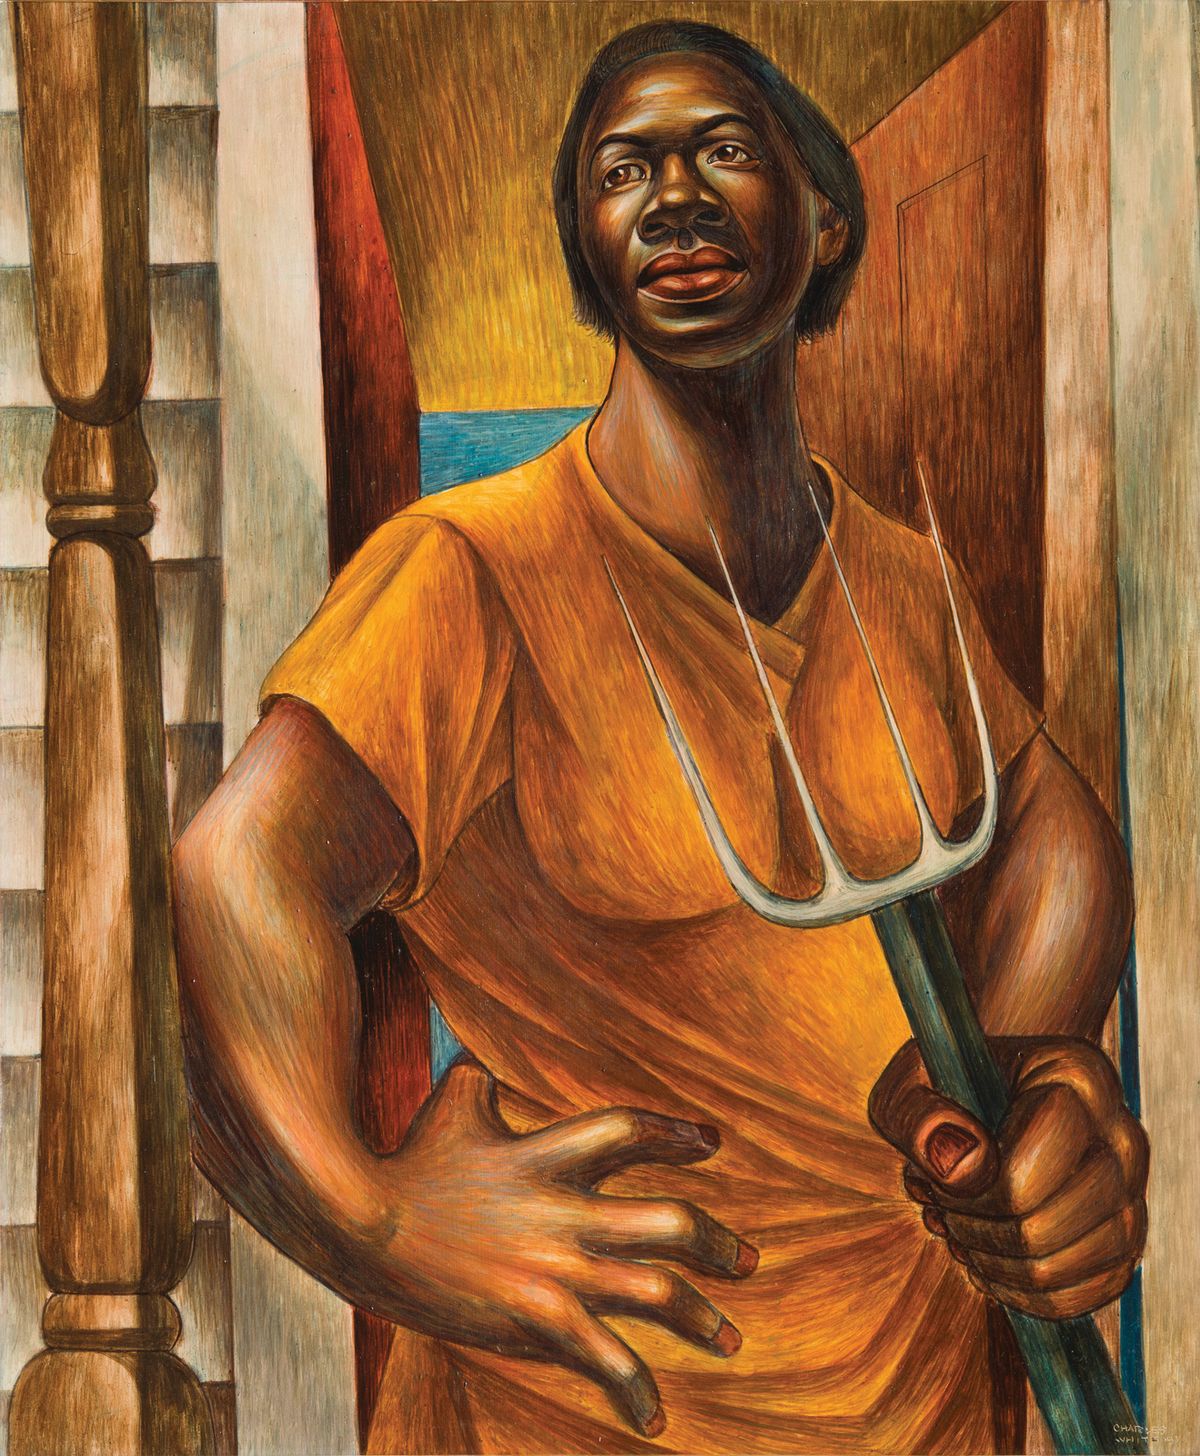 A sharecropper is depicted in Our Land (1951), one of White’s “images of dignity” The Charles White Archives/Gavin Ashworth